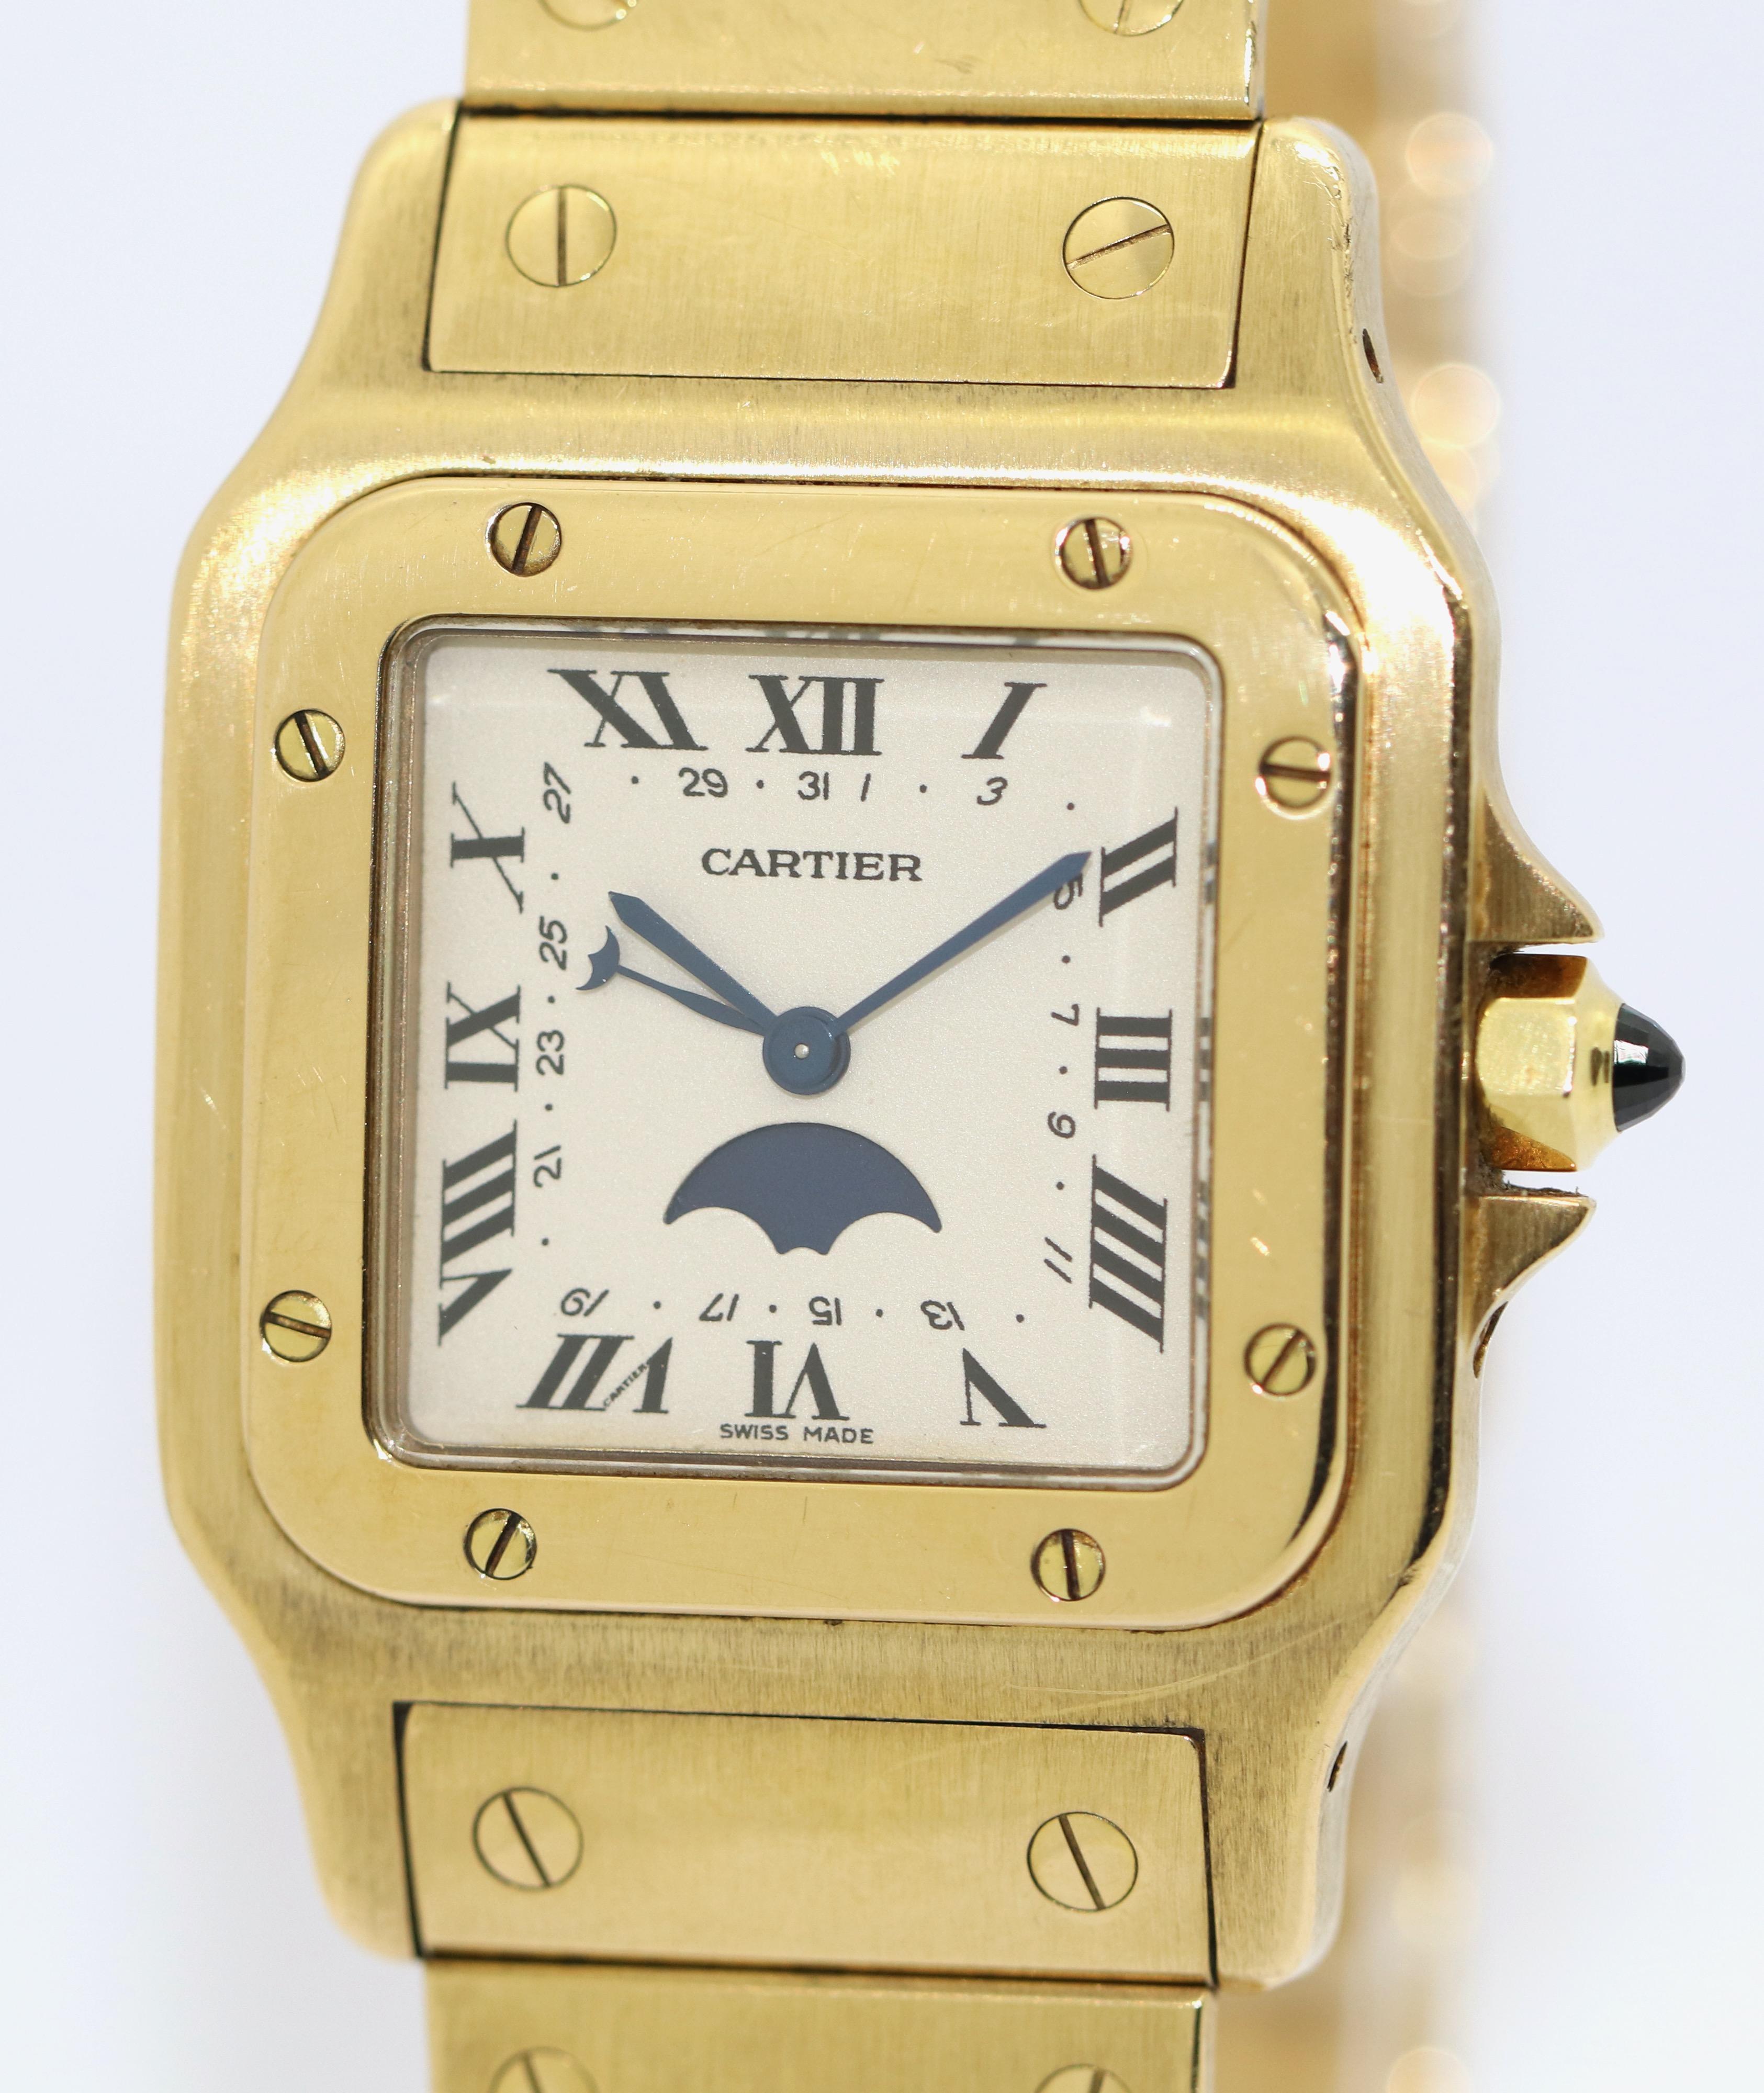 Cartier Santos Moonphase and Date, 18 Karat Gold. Quartz Movement.

Very good original Condition - unpolished. 

Including certificate of authenticity and new service.

Diameter measured without crown.